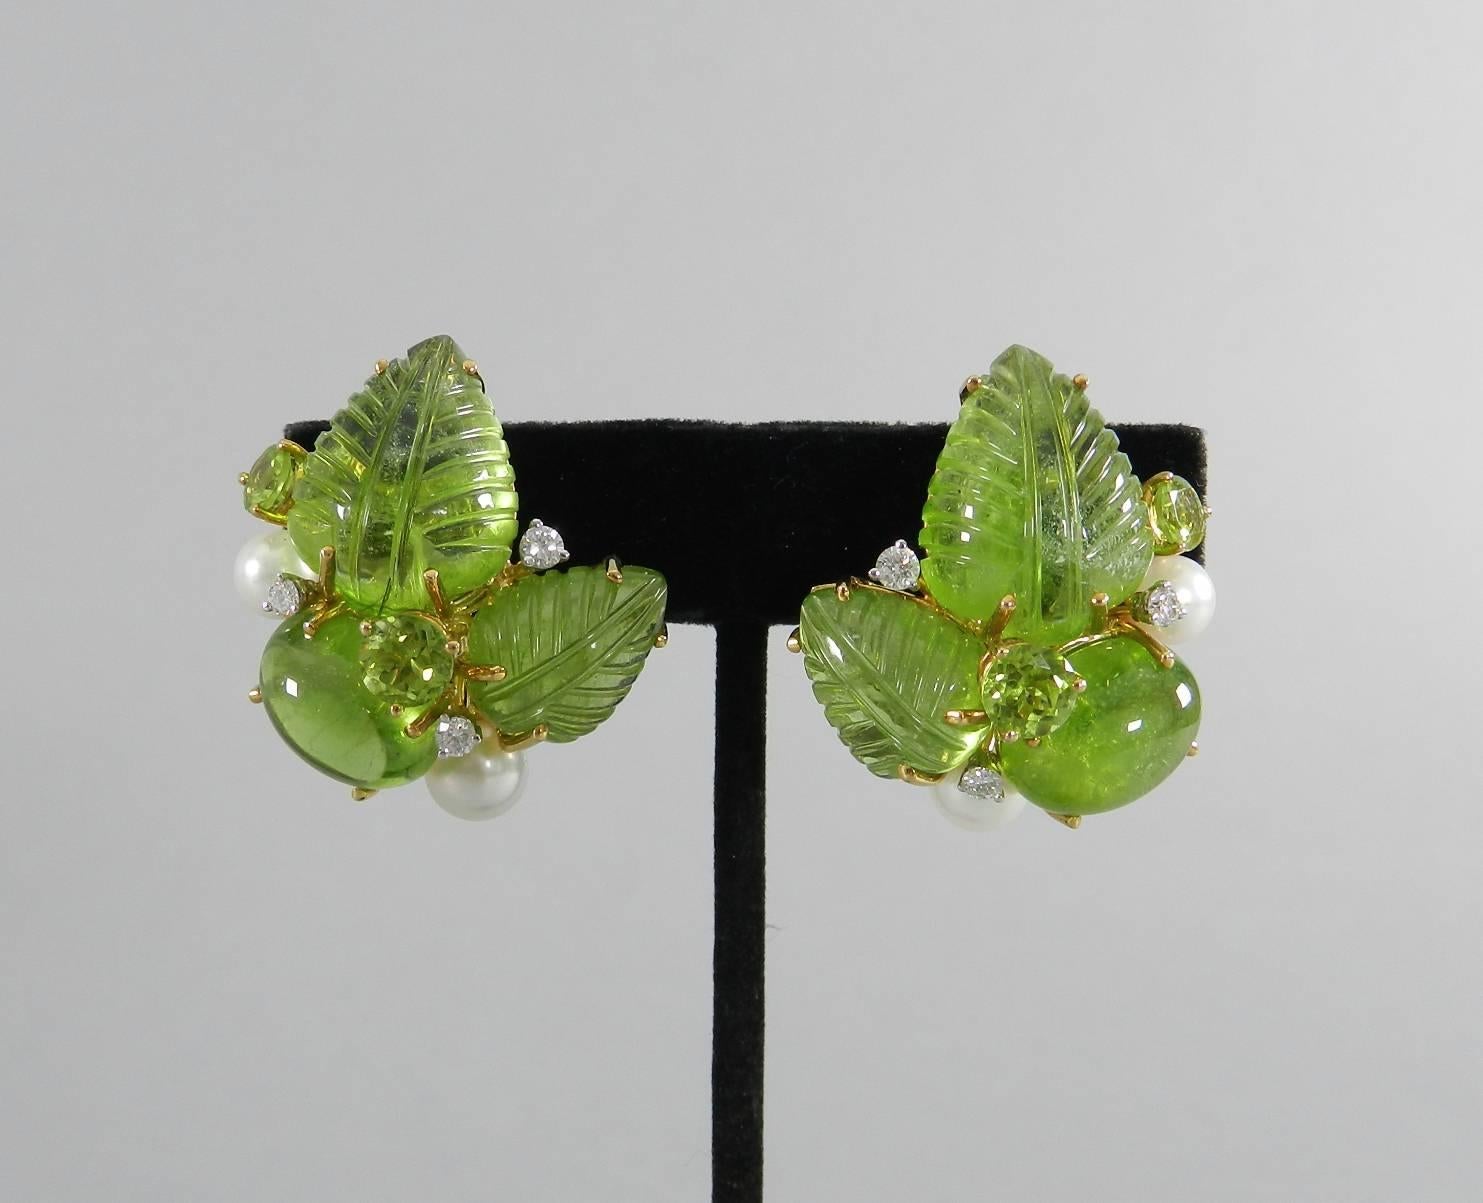 Seaman Schepps peridot bubble cluster leaf earrings.  Carved peridot green leaves, pearls, and diamonds set in 18k yellow gold. Clipback. Signed Seaman Schepps 750.  Each earring measures approximately 1.25 x 125”.  Total weight 34.8 grams.

We ship